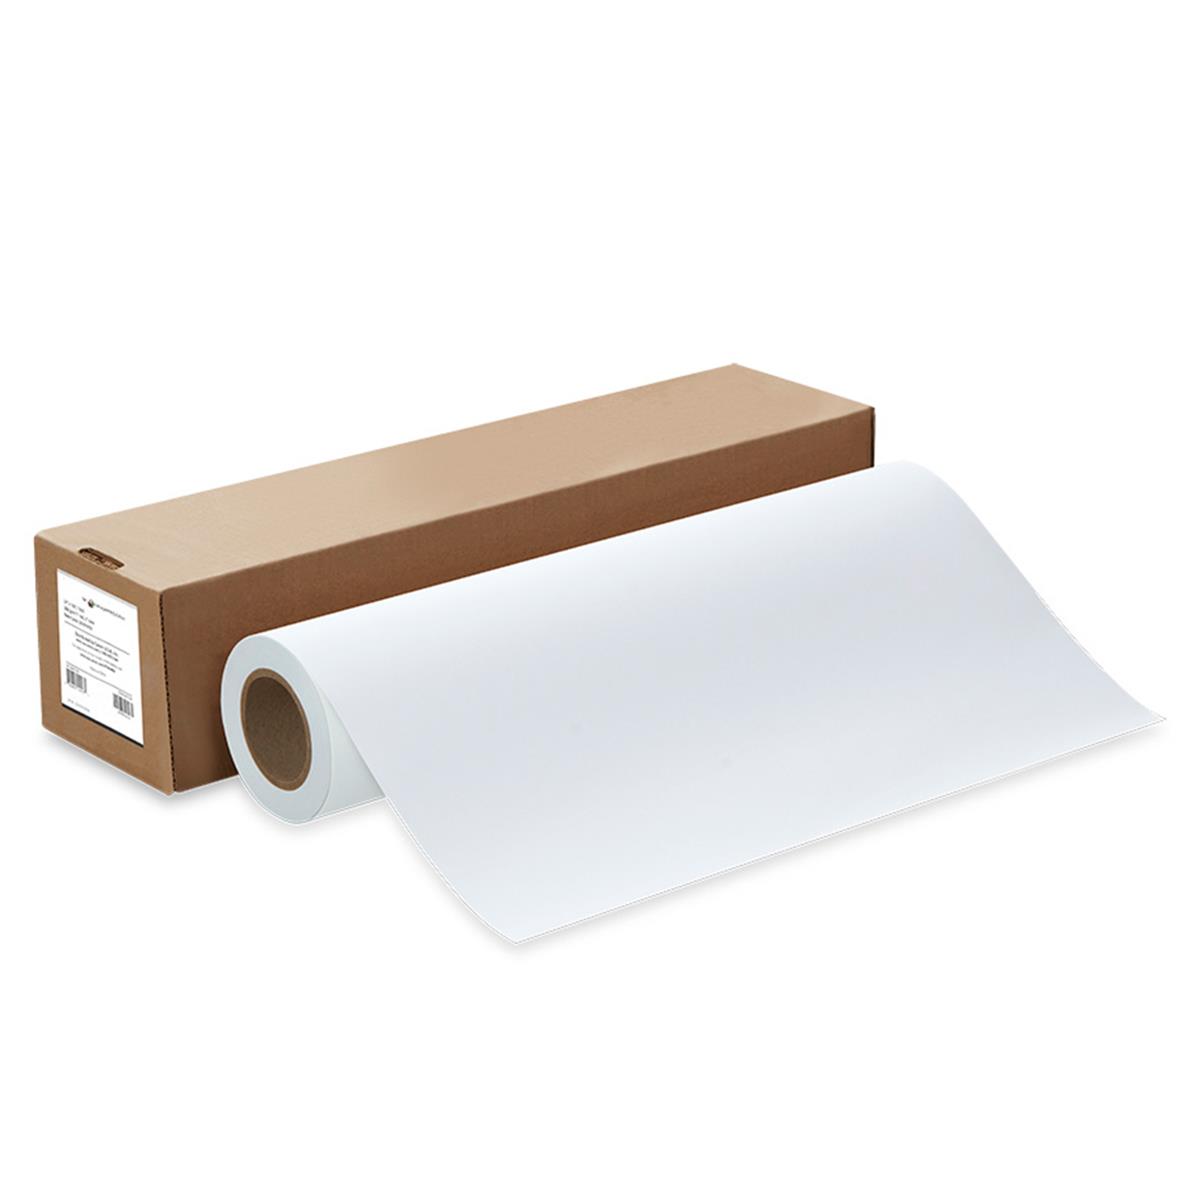 Image of Canon imagePROGRAF Durable Bond Paper